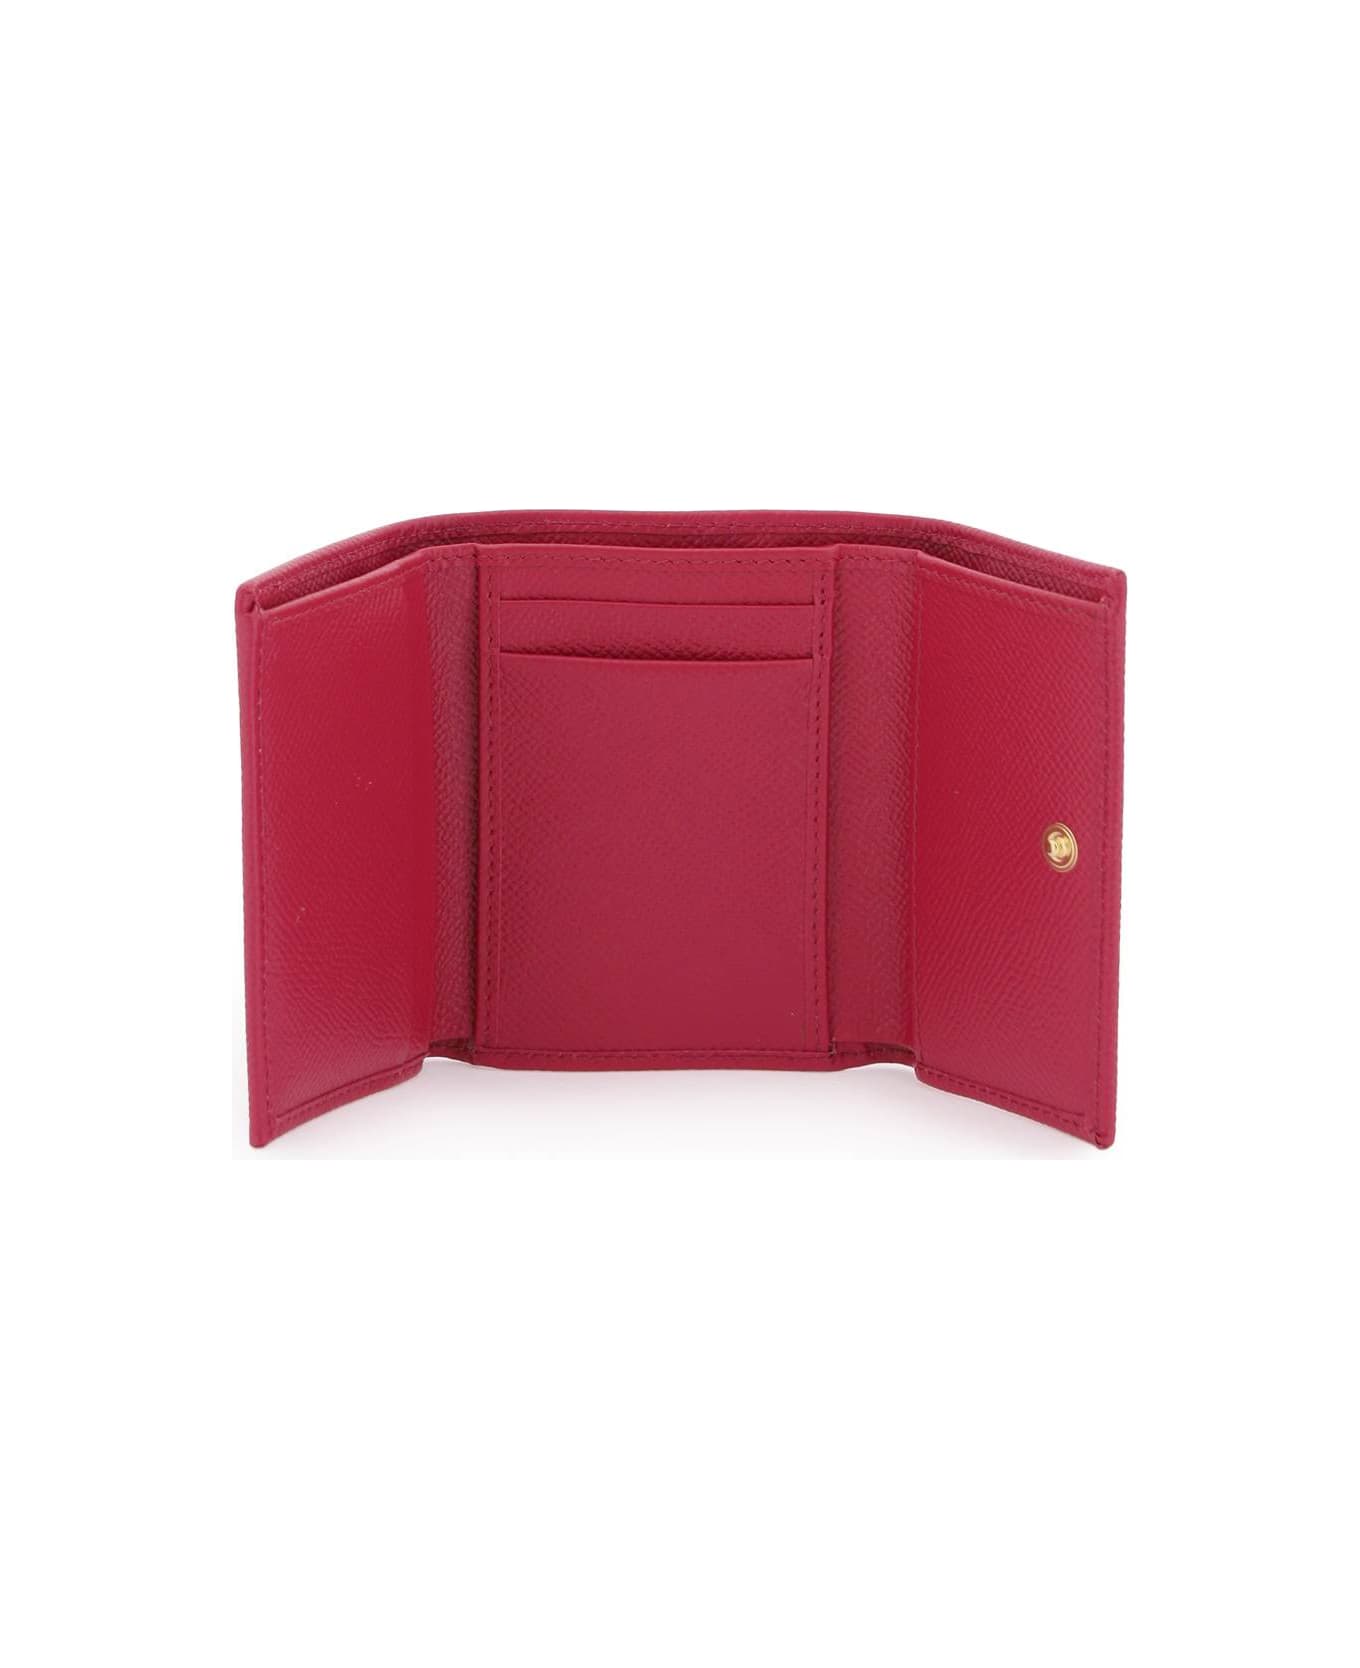 Dolce & Gabbana Leather Wallet - Pink 財布